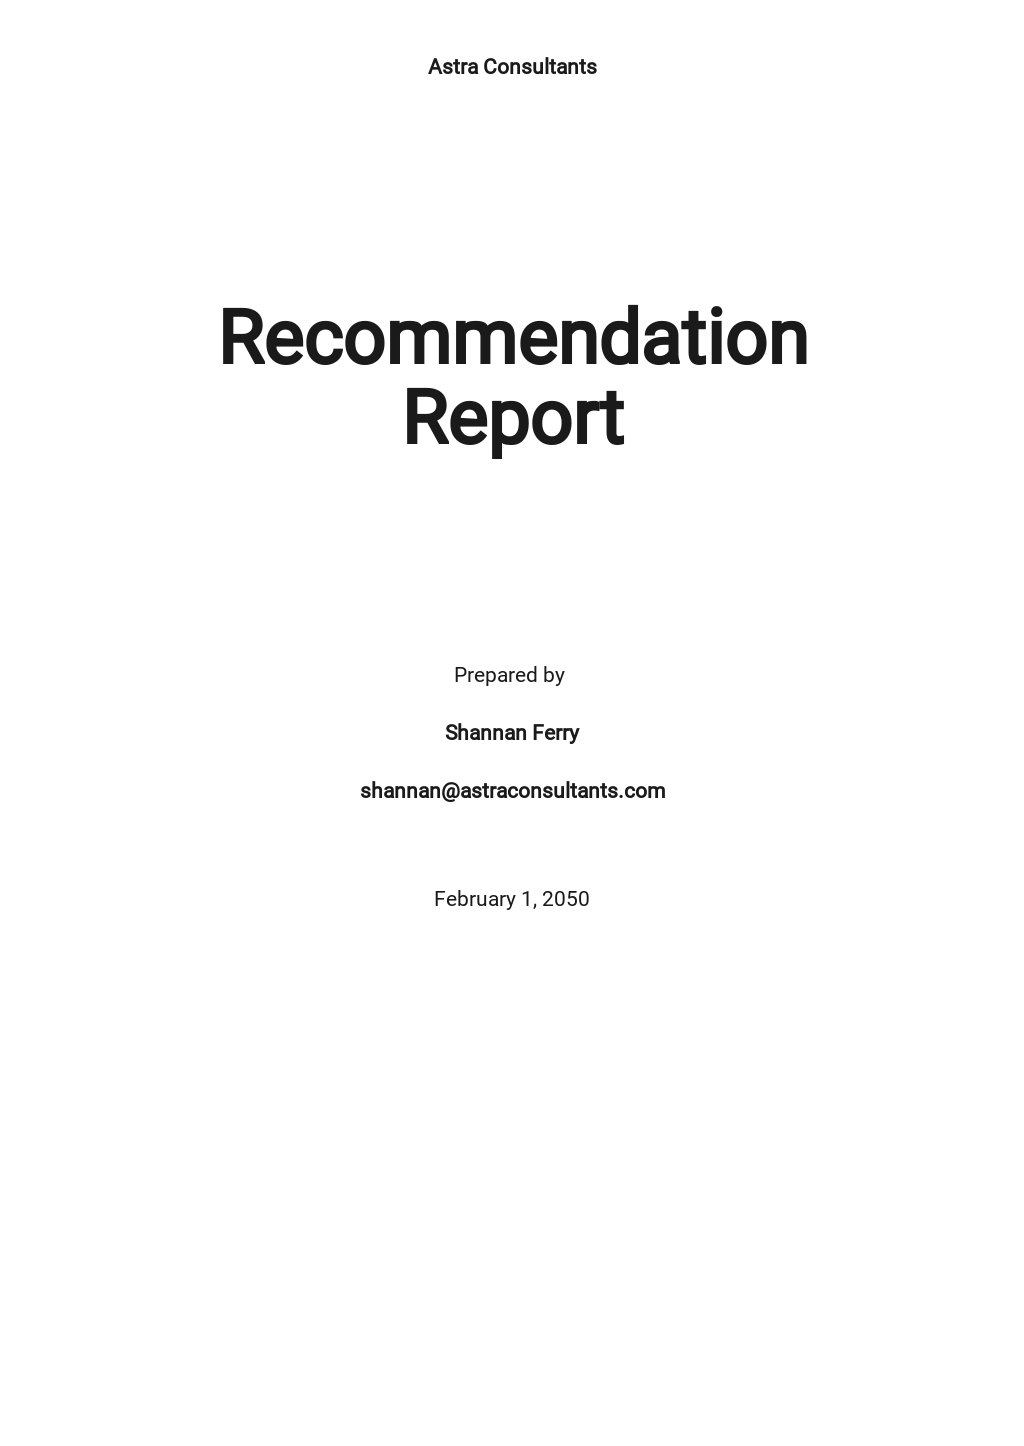 Recommendation Report Template Free Download - FREE PRINTABLE For Recommendation Report Template